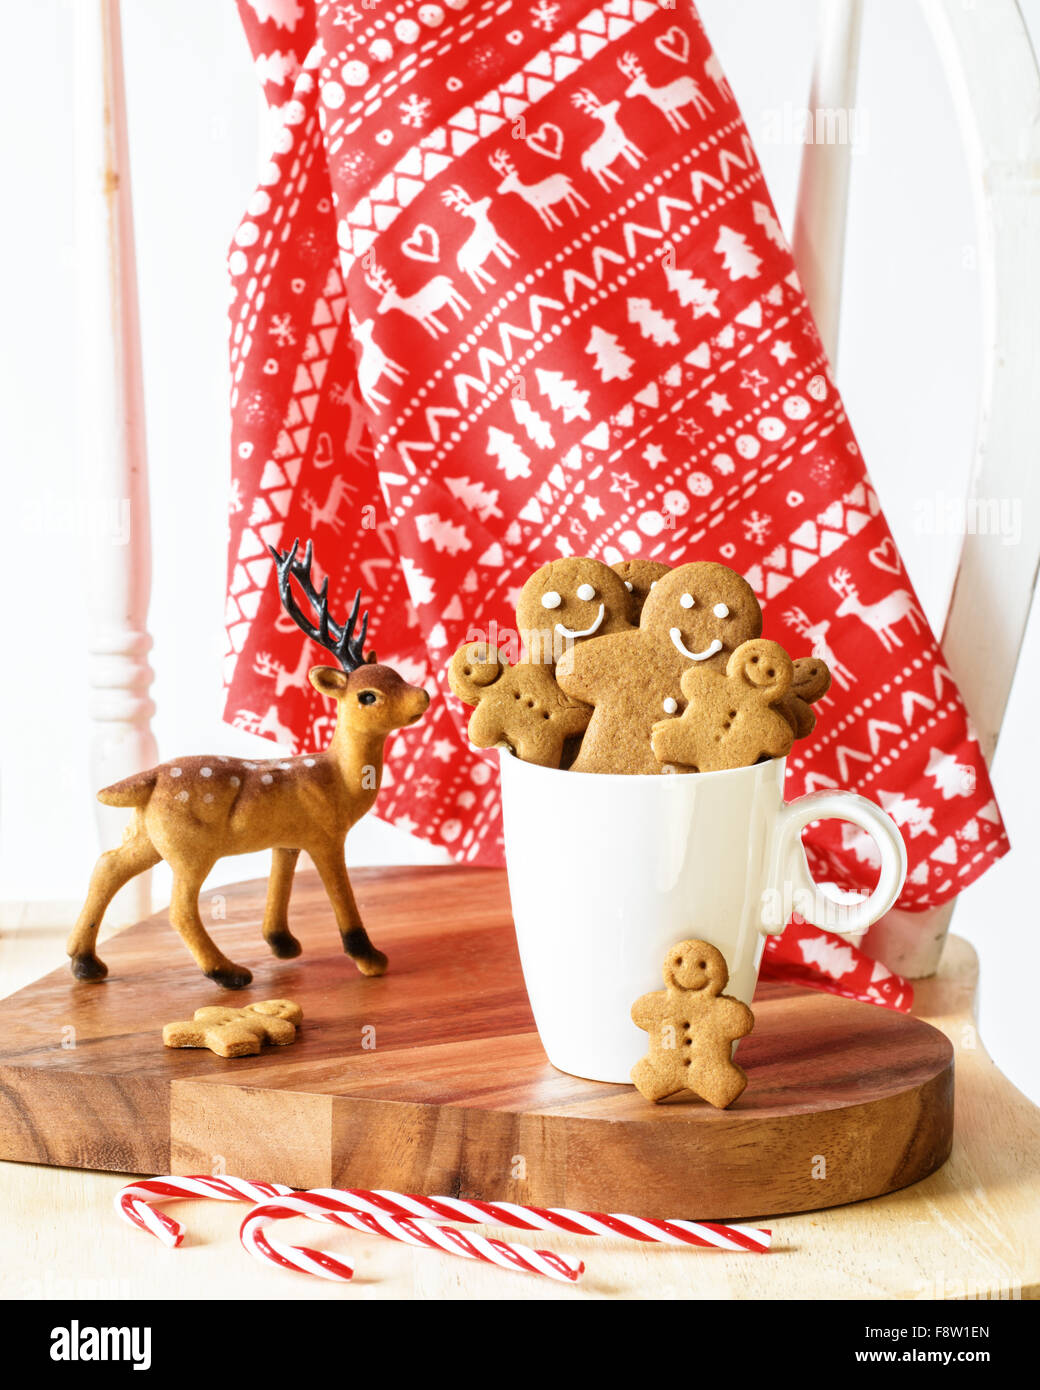 Freshly baked gingerbread cookies at Christmas Stock Photo